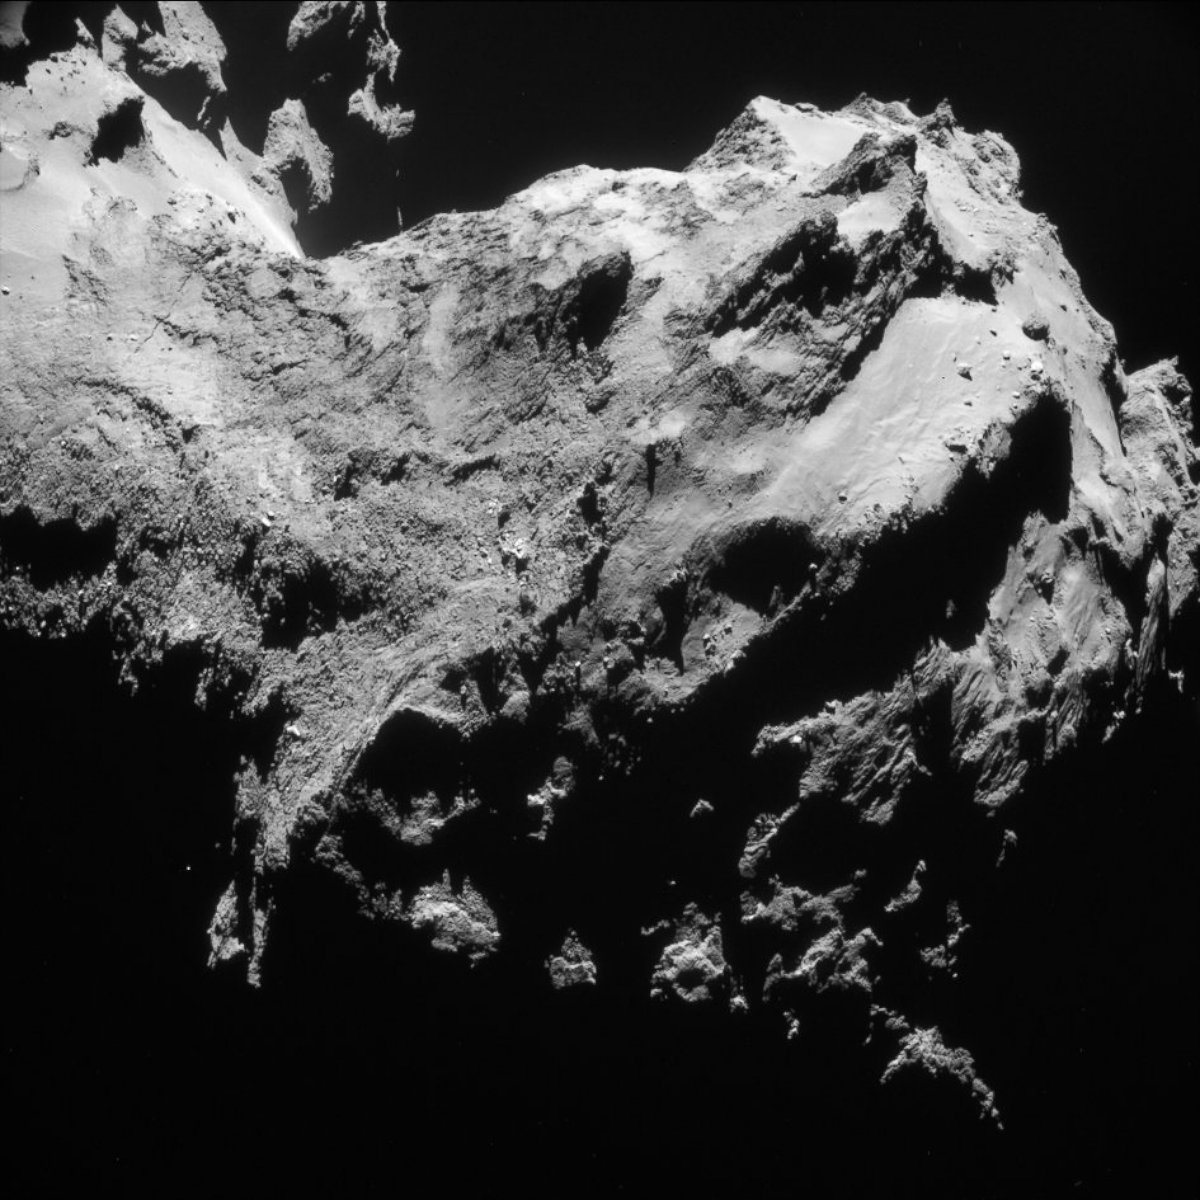 PHOTO: The European Space Agency is celebrating the one year anniversary of Rosetta arriving at Comet 67P.